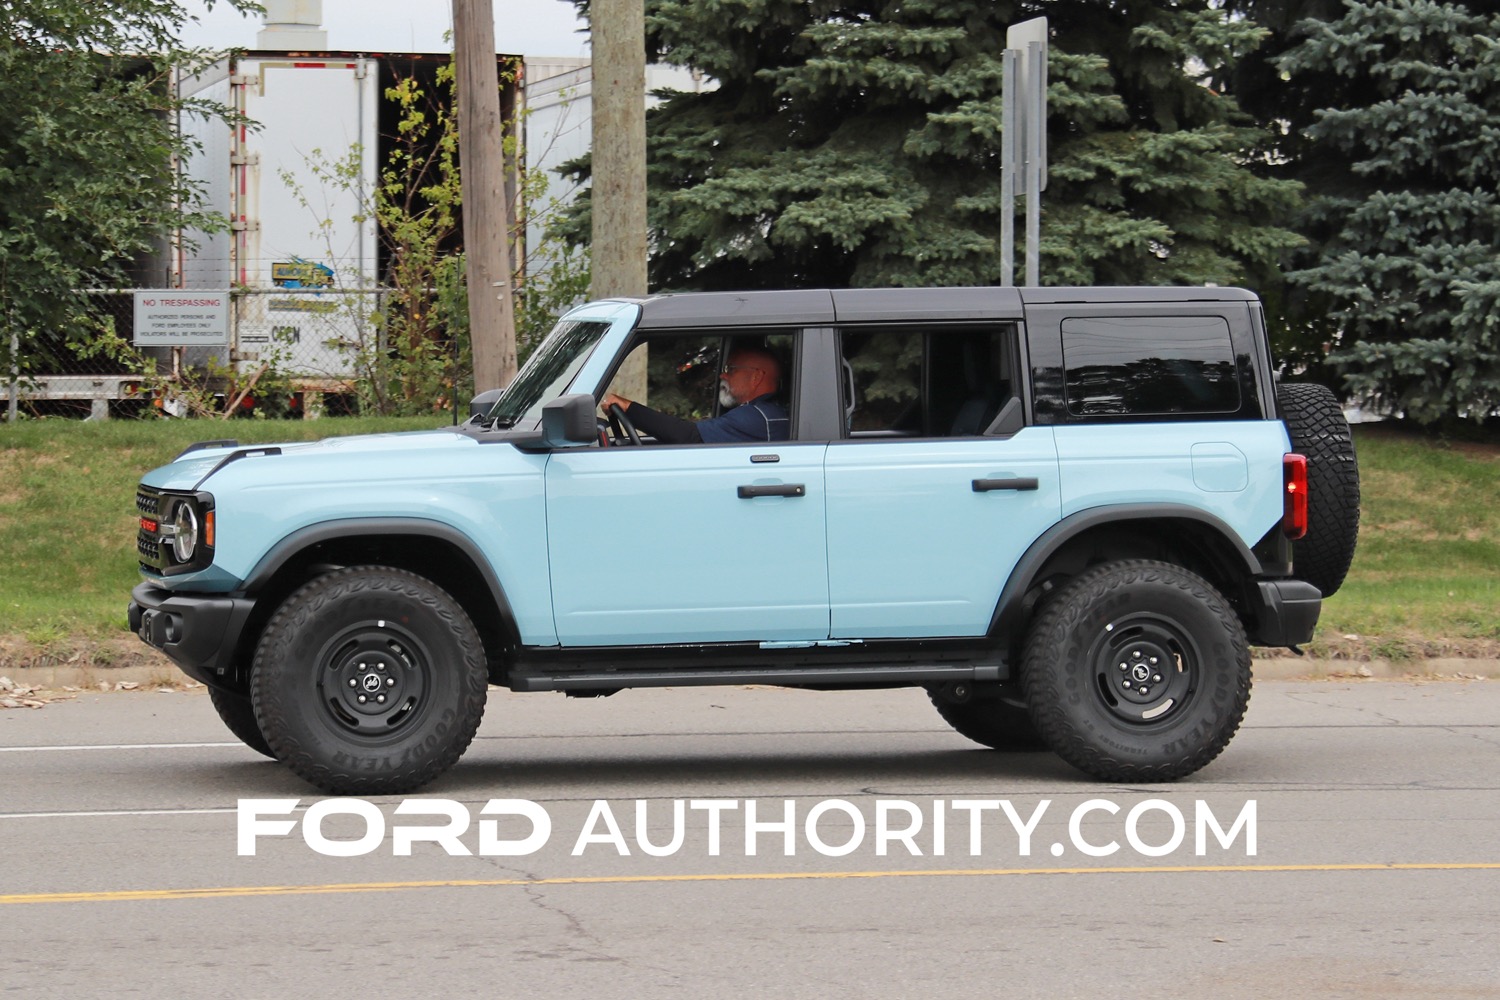 Bronco Robin's Egg Blue + Black Grill + Black Painted MOD Top Bronco Heritage Spotted 2023-Ford-Bronco-Prototype-Spy-Shots-Robins-Egg-Blue-Potential-Heritage-Edition-with-Black-Acc